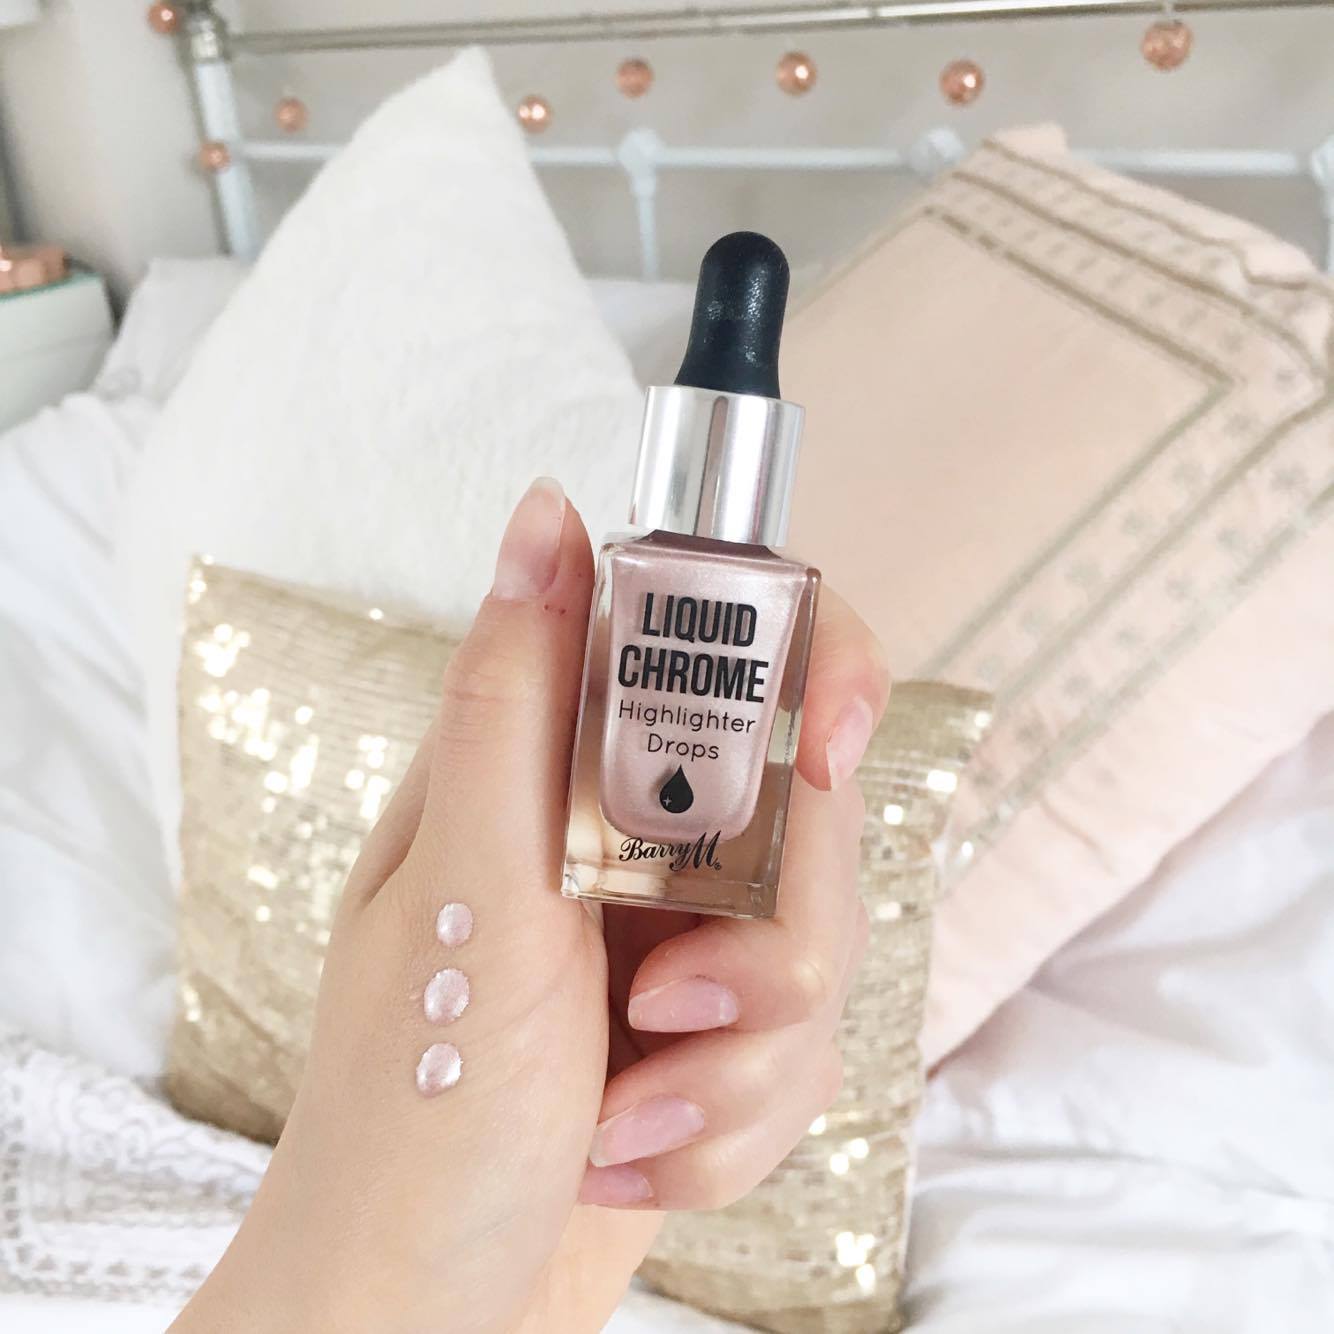 Give lavendel Glæd dig Cristy Jade Lydia: New Barry M Liquid Chrome Highlighter Drops- Review